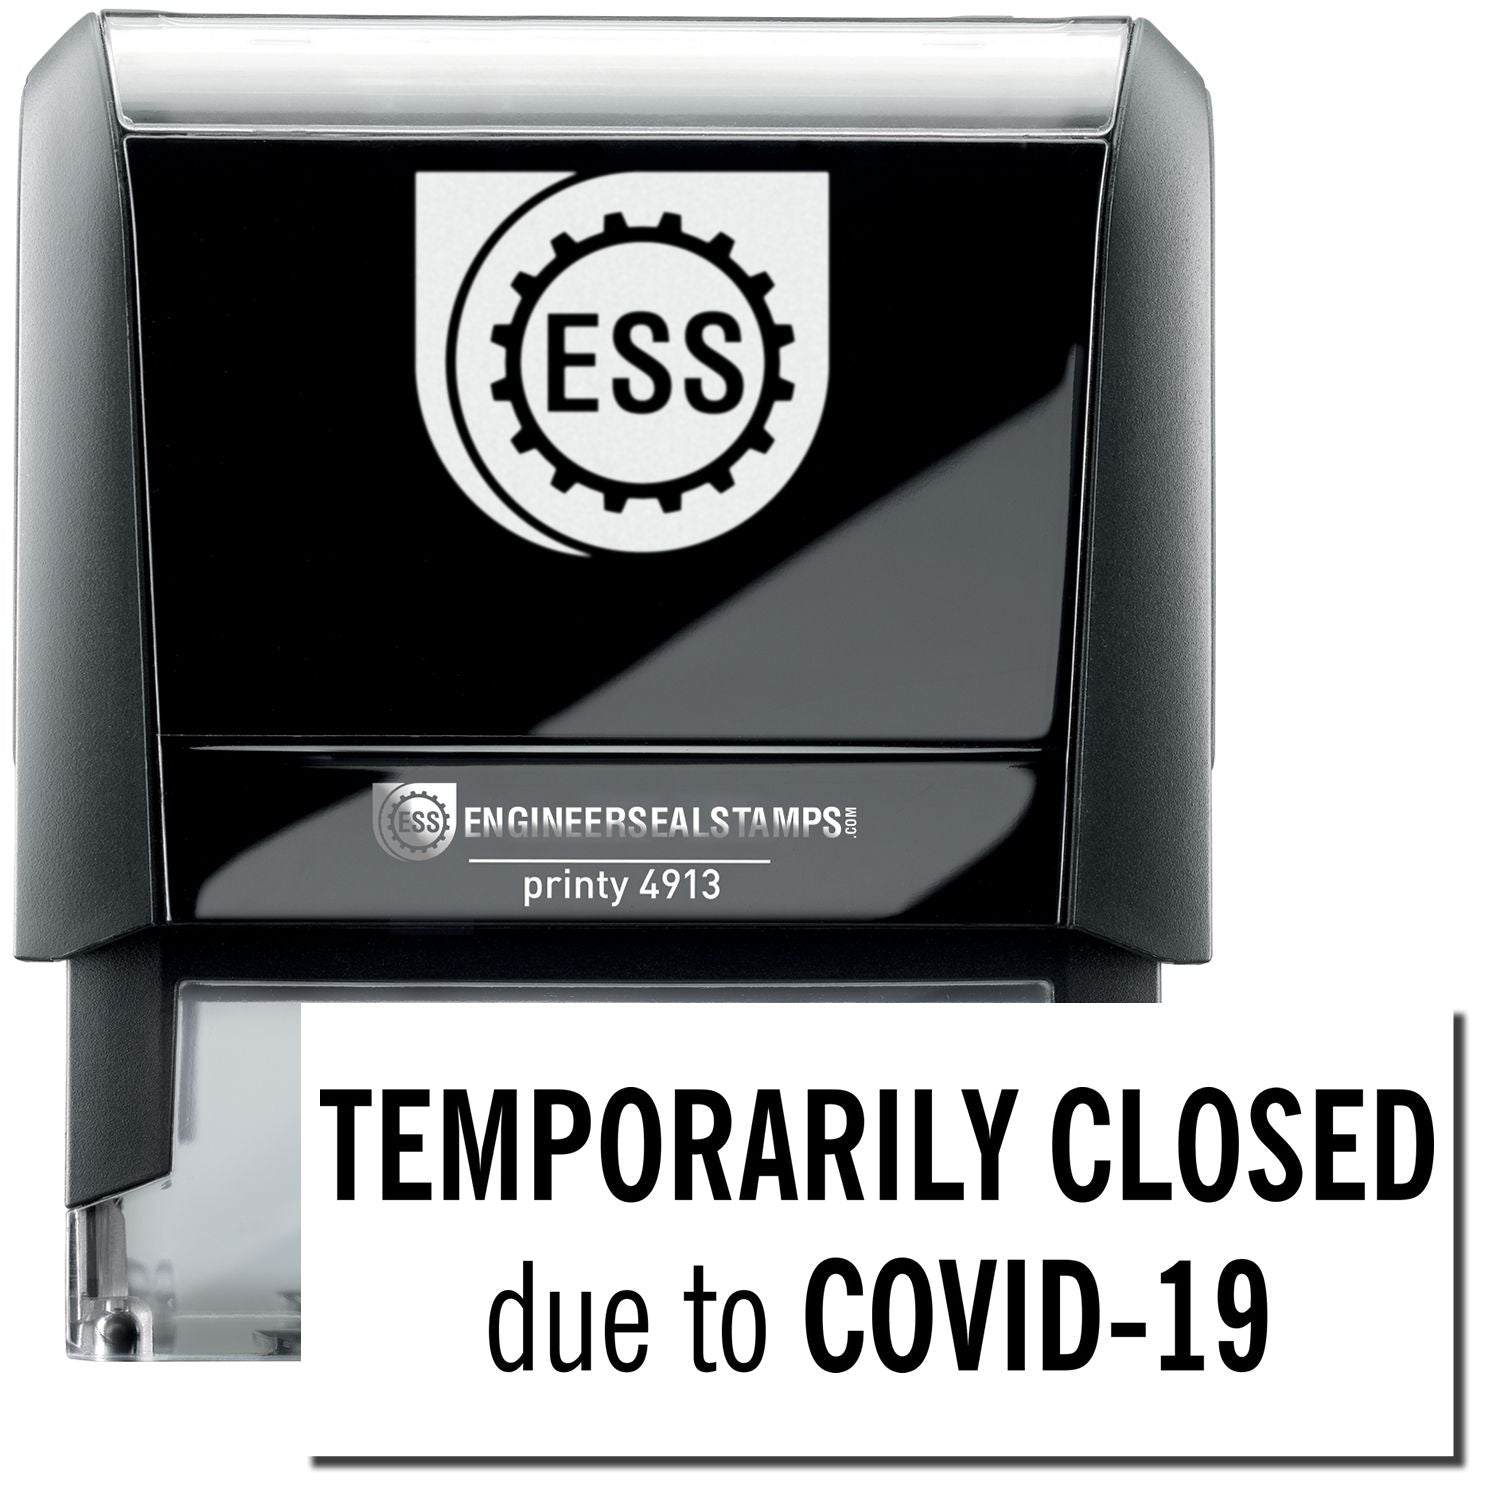 A self-inking stamp with a stamped image showing how the text "TEMPORARILY CLOSED due to COVID -19" in a large font is displayed by it after stamping.